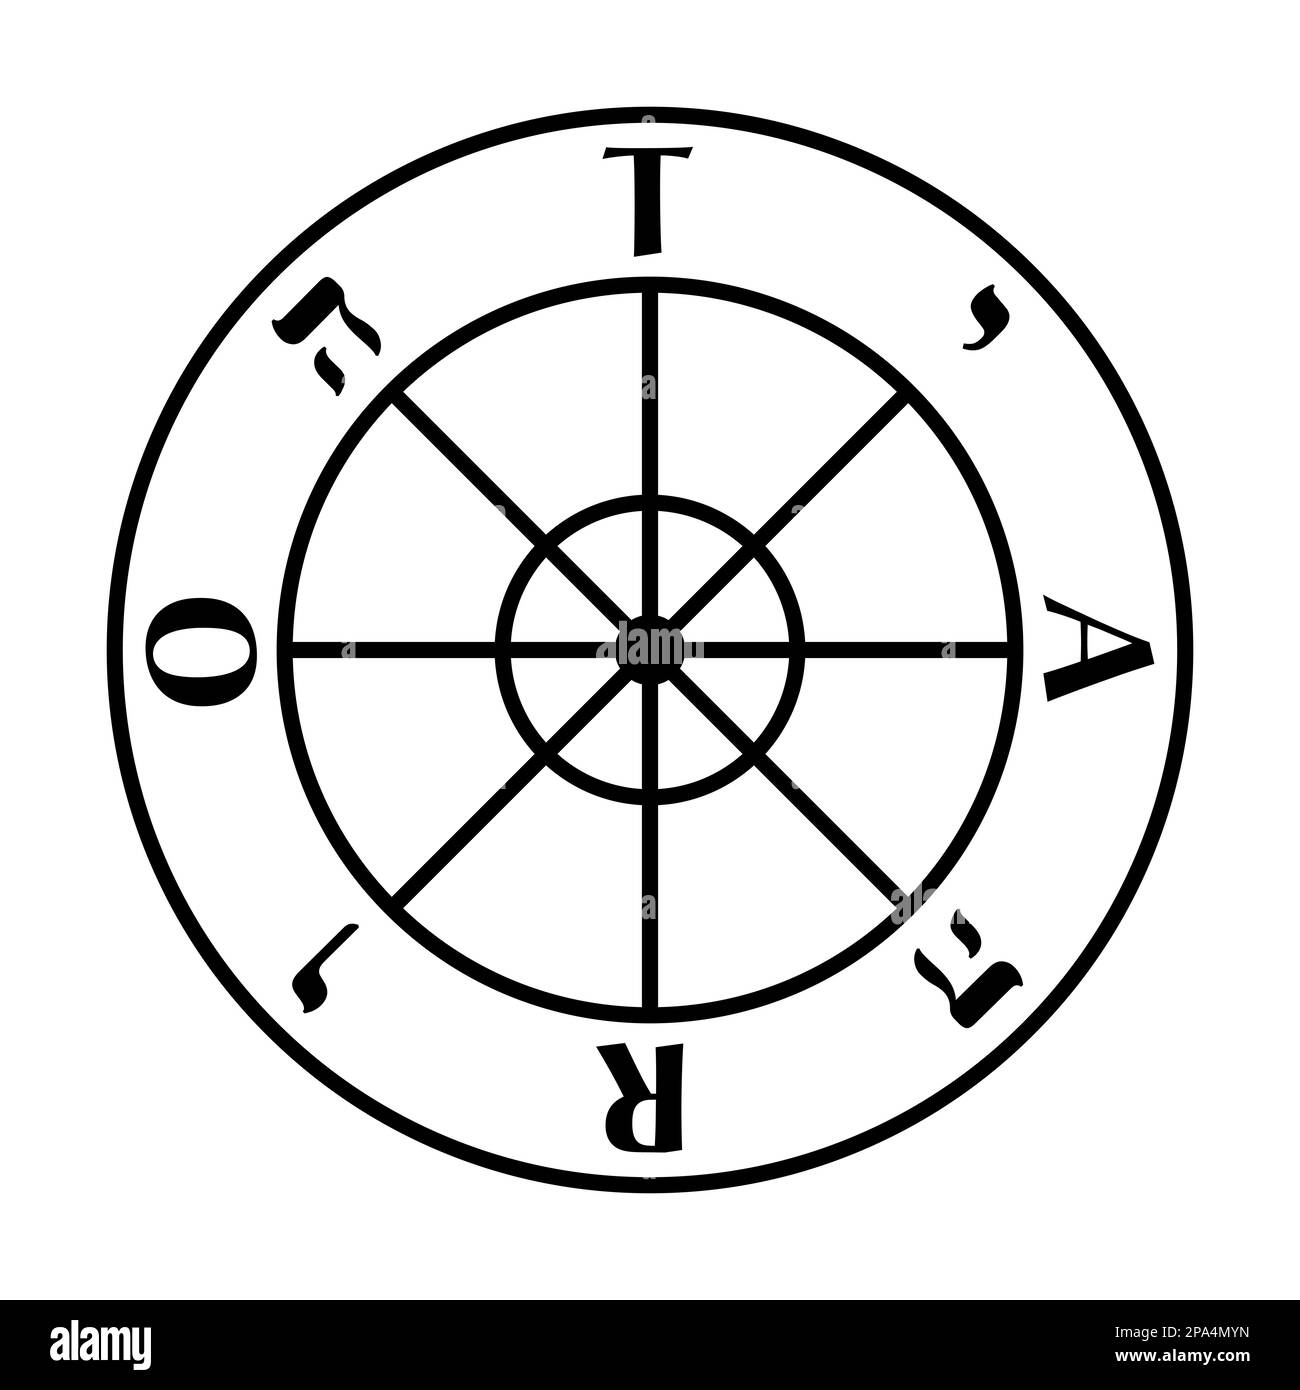 Wheel of Fortune, symbol from the tarot card and Major Arcanum number X. Wagon wheel with 8 spokes, clockwise the capital letters TARO, and Tetragram. Stock Photo